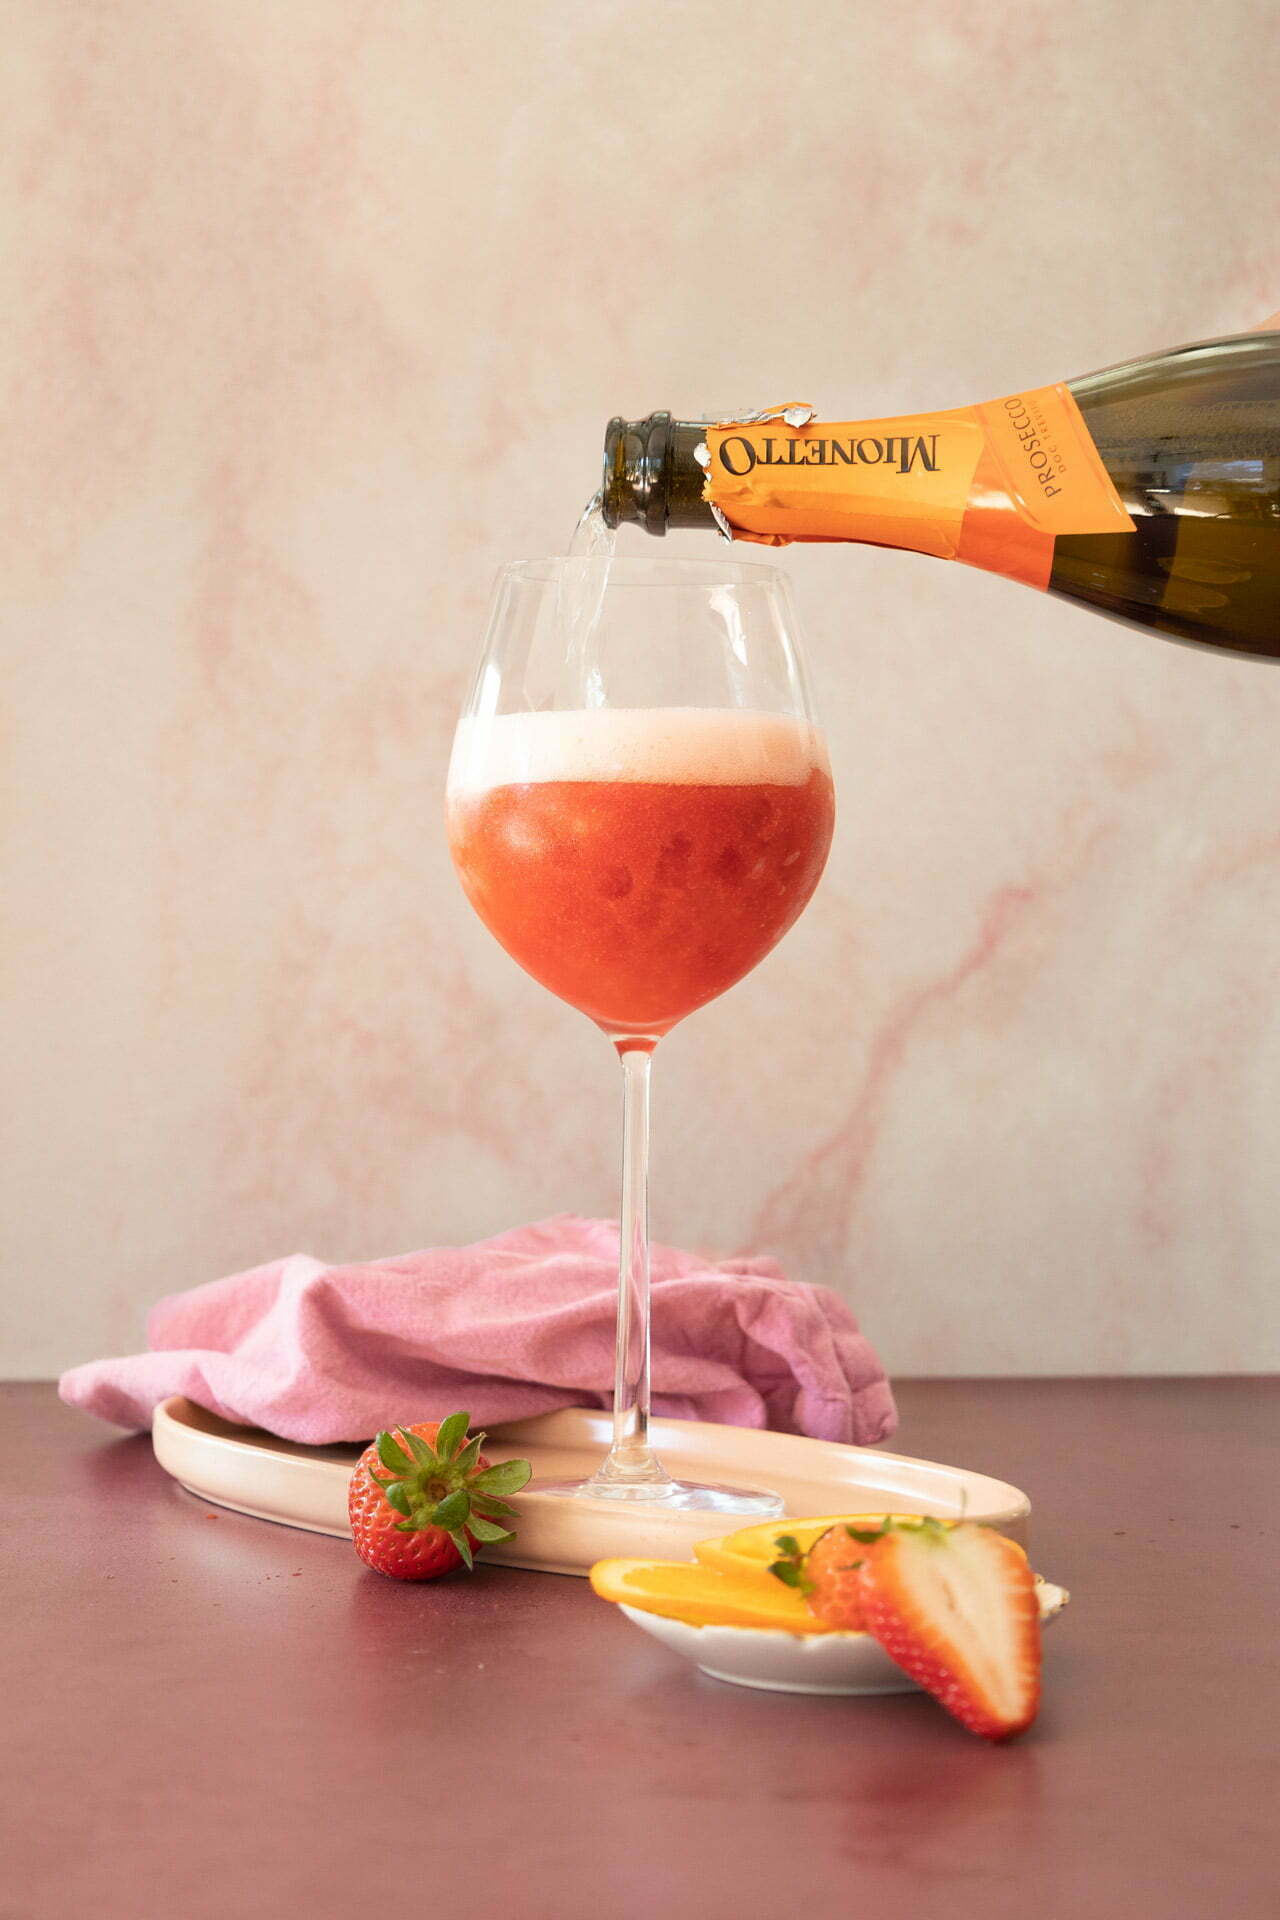 A glass of red-orange bubbly cocktail is being poured from a bottle of Martini Asti. The glass is filled halfway with frothy liquid. A fresh strawberry and slice of orange garnish the base, arranged on a wooden board with a pink cloth in the background against a mottled light backdrop, perfect for an Aperol spritz.